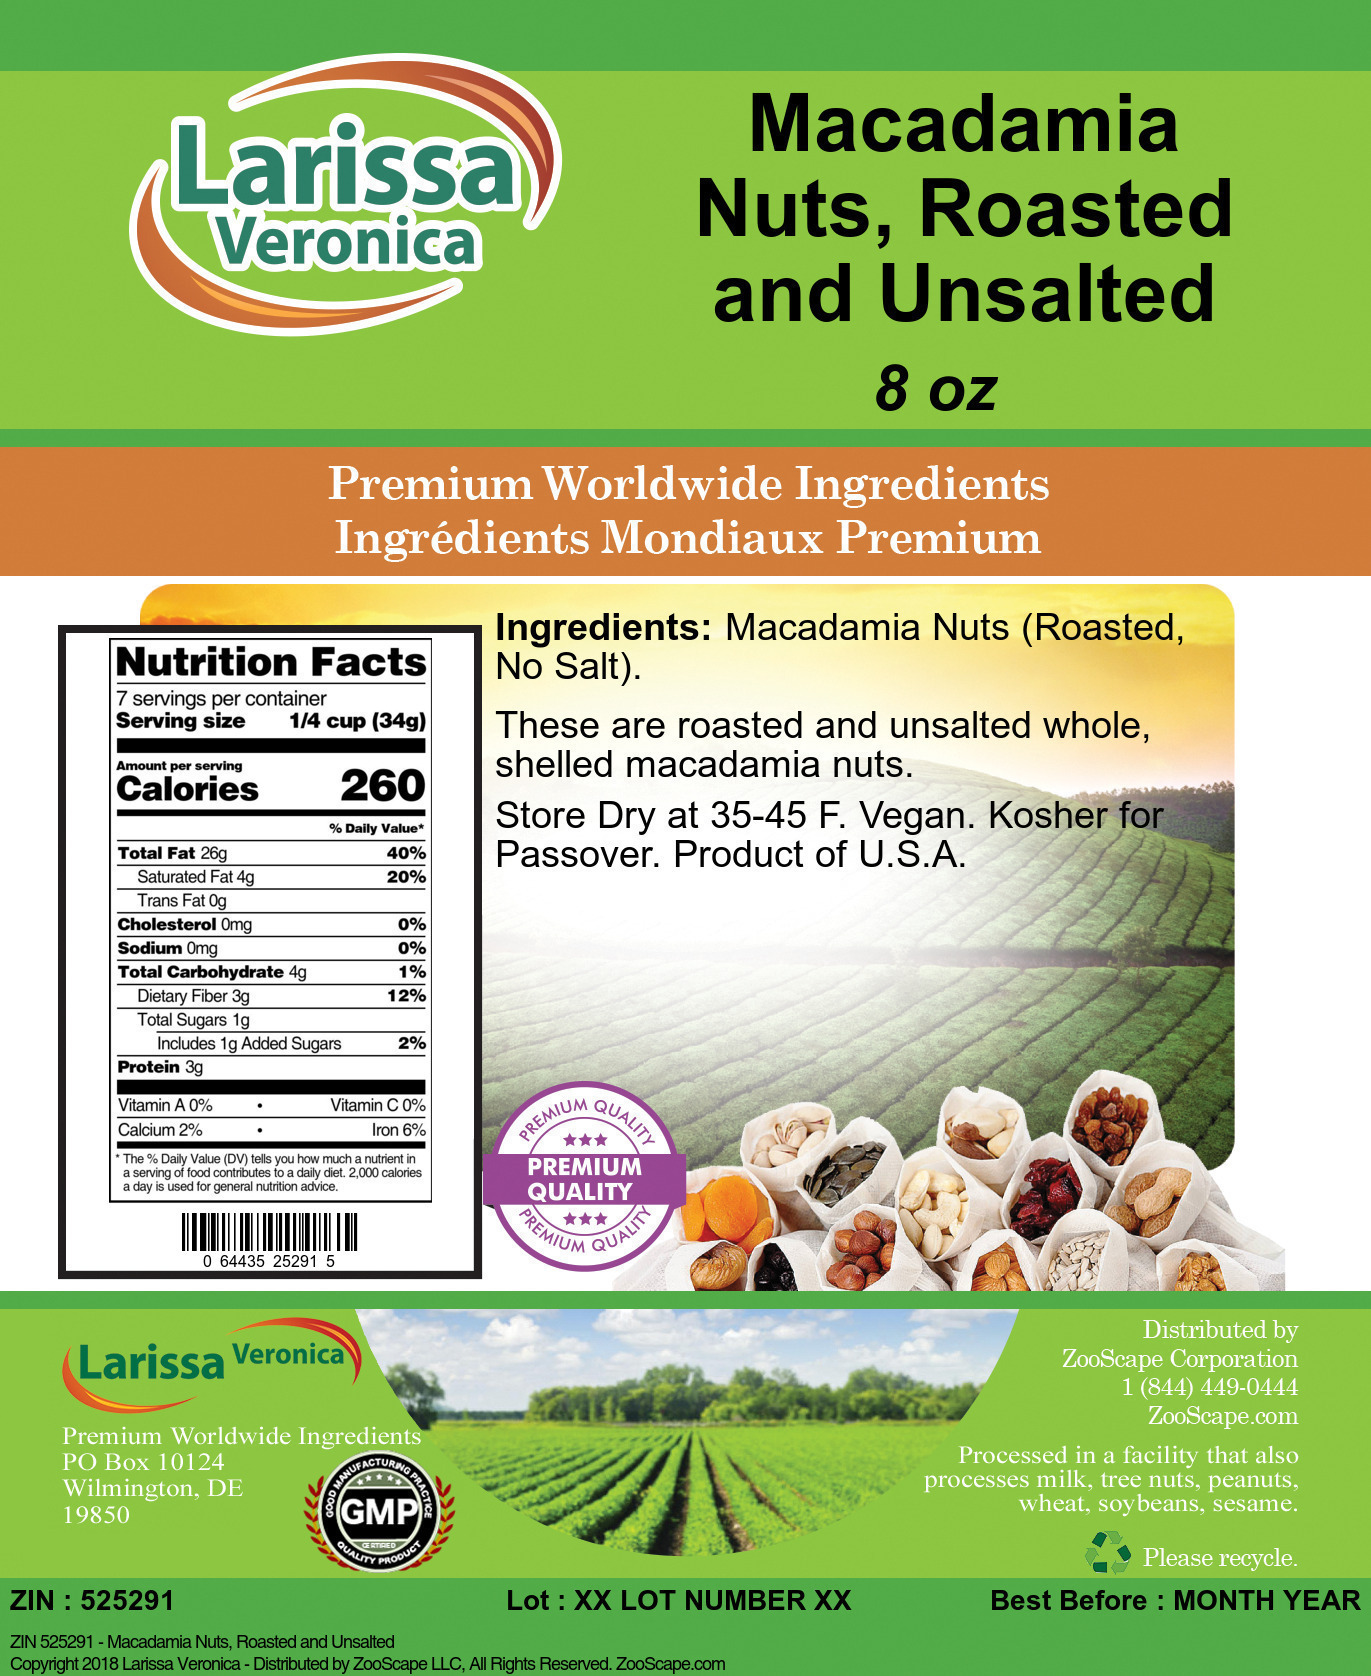 Macadamia Nuts, Roasted and Unsalted - Label